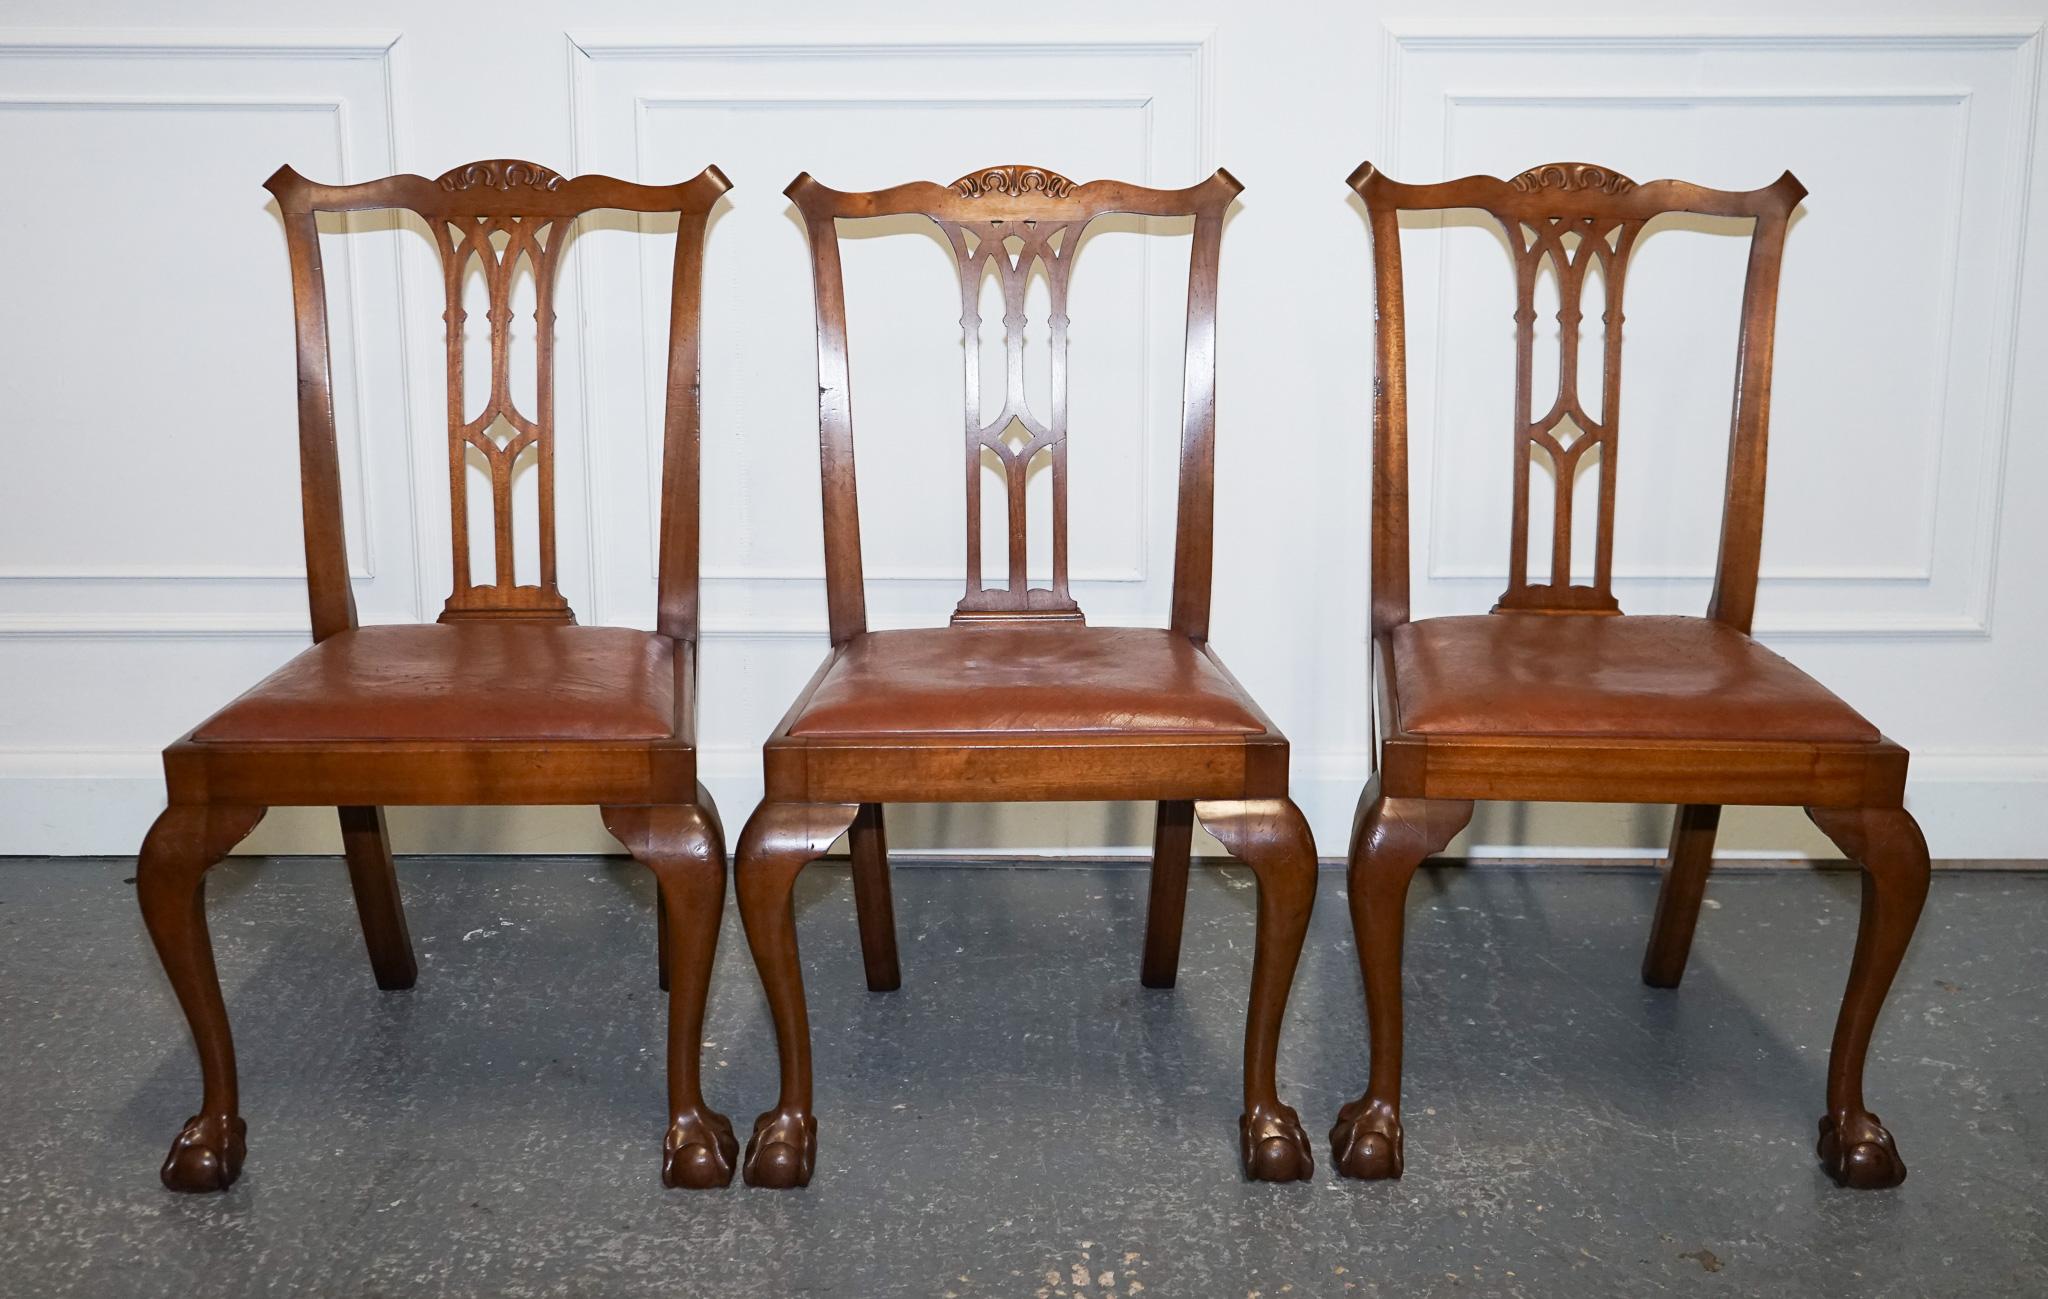 Chippendale CHIPPENDALE STYLE 5 DINING CHAIRS WiTH LEATHER SEATS PERFECT FOR ROUND TABLE For Sale